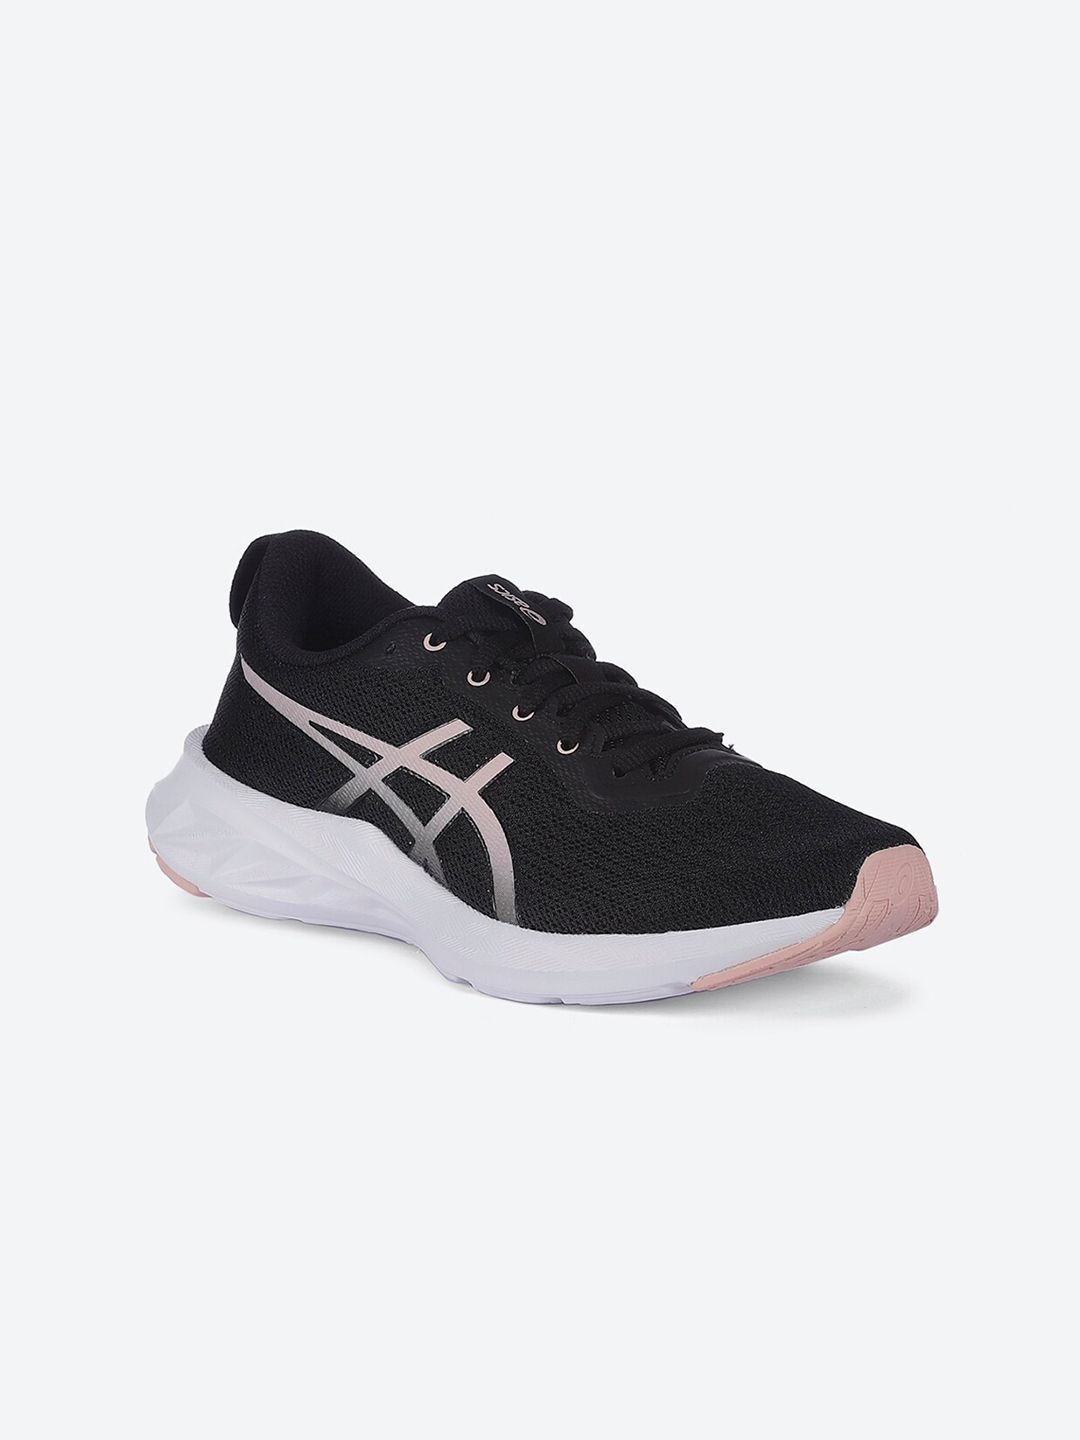 ASICS Women Black Sports Shoes Price in India